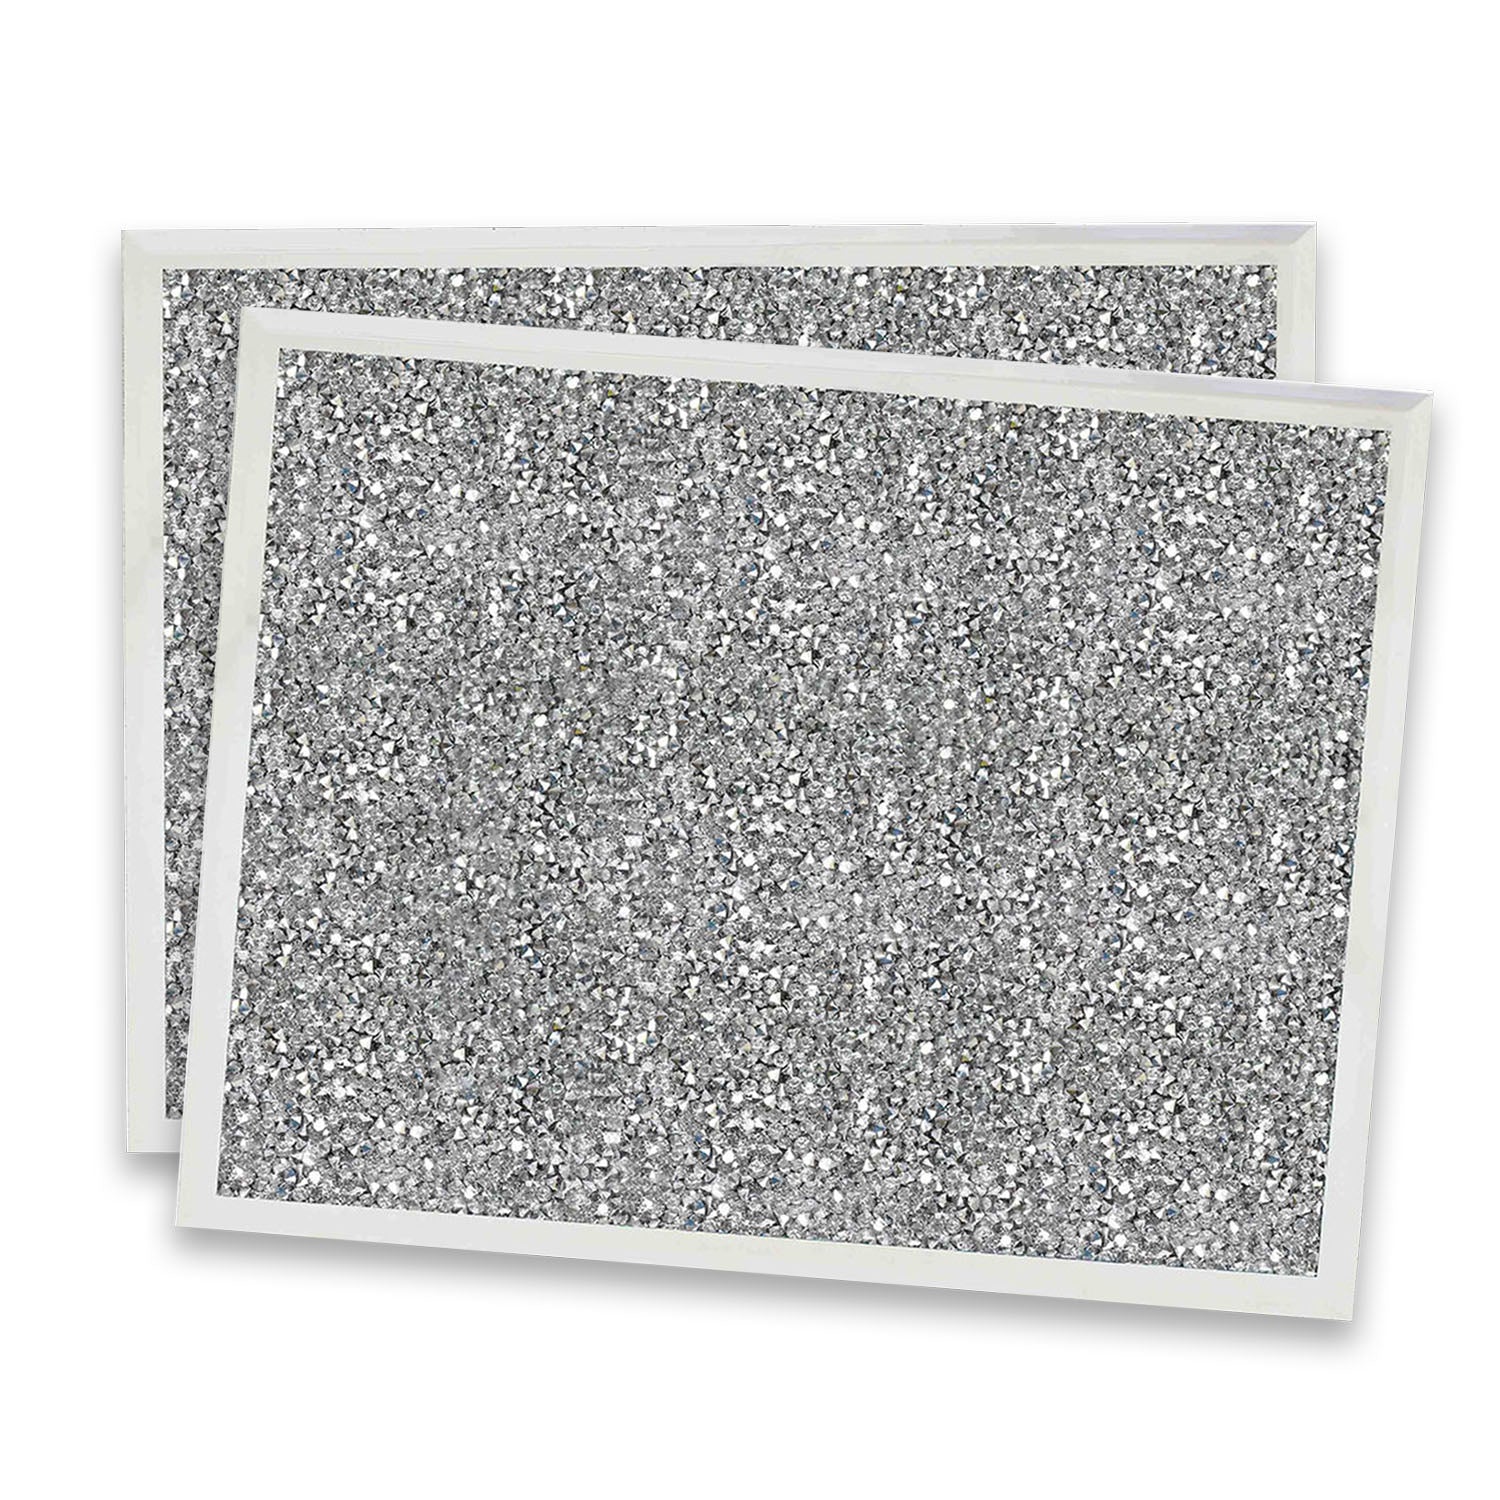 Set of 2 Crushed Crystals Mirrored Glass Placemats